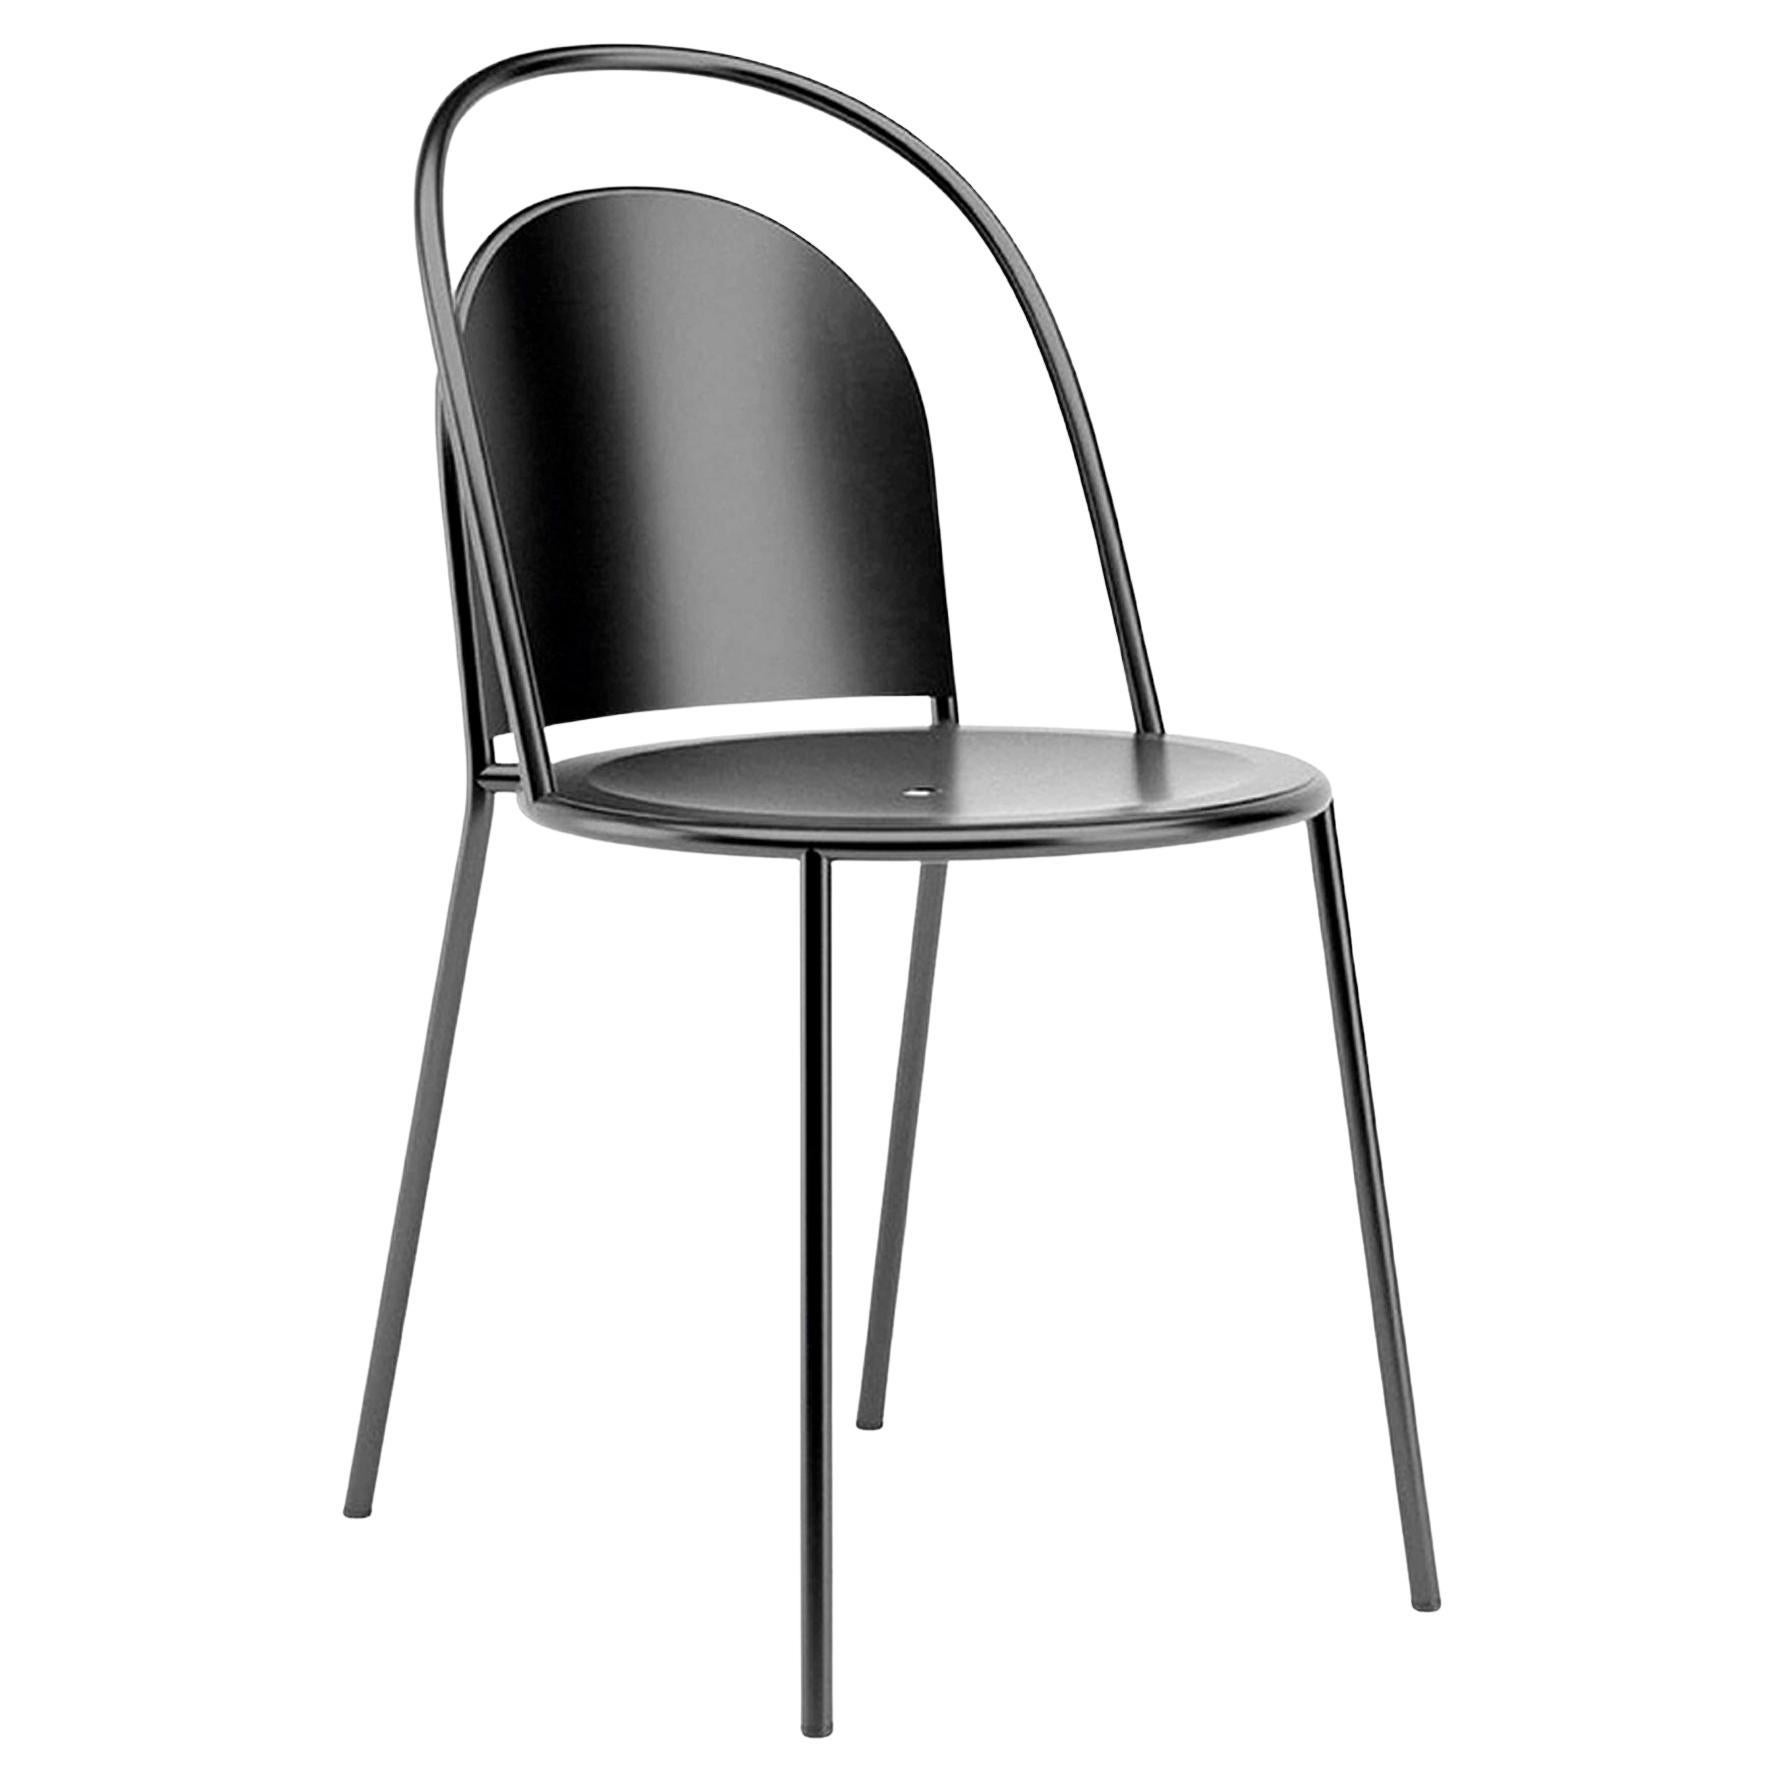 Hayche Dune Chair, Black Powder Coated Steel Frame, UK, In Stock For Sale